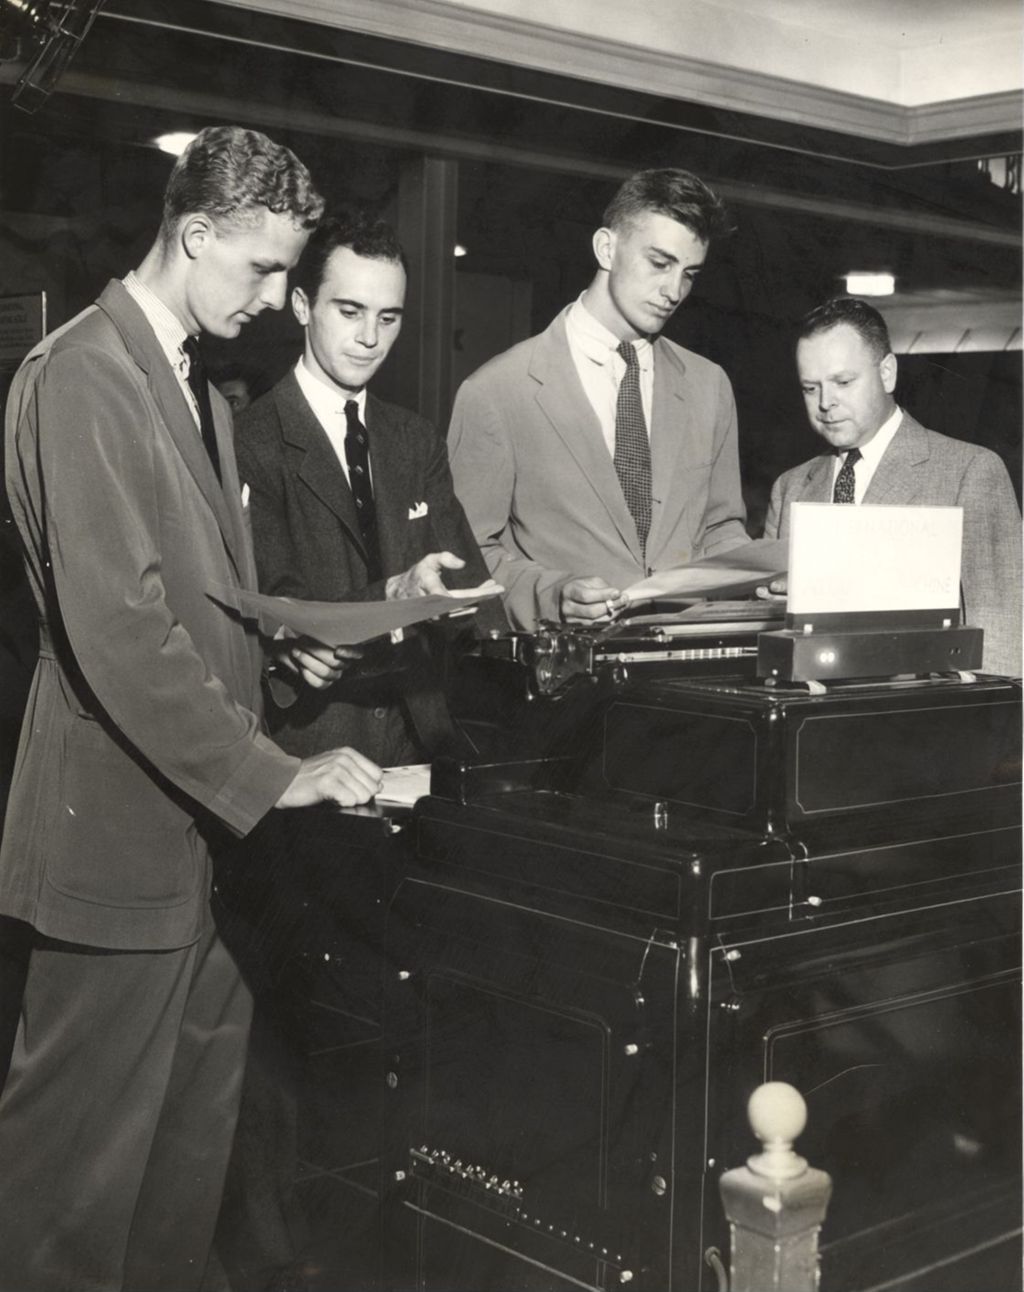 Miniature of Franklin D. Roosevelt, Jr. inspects a report at the International Business machines exhibit